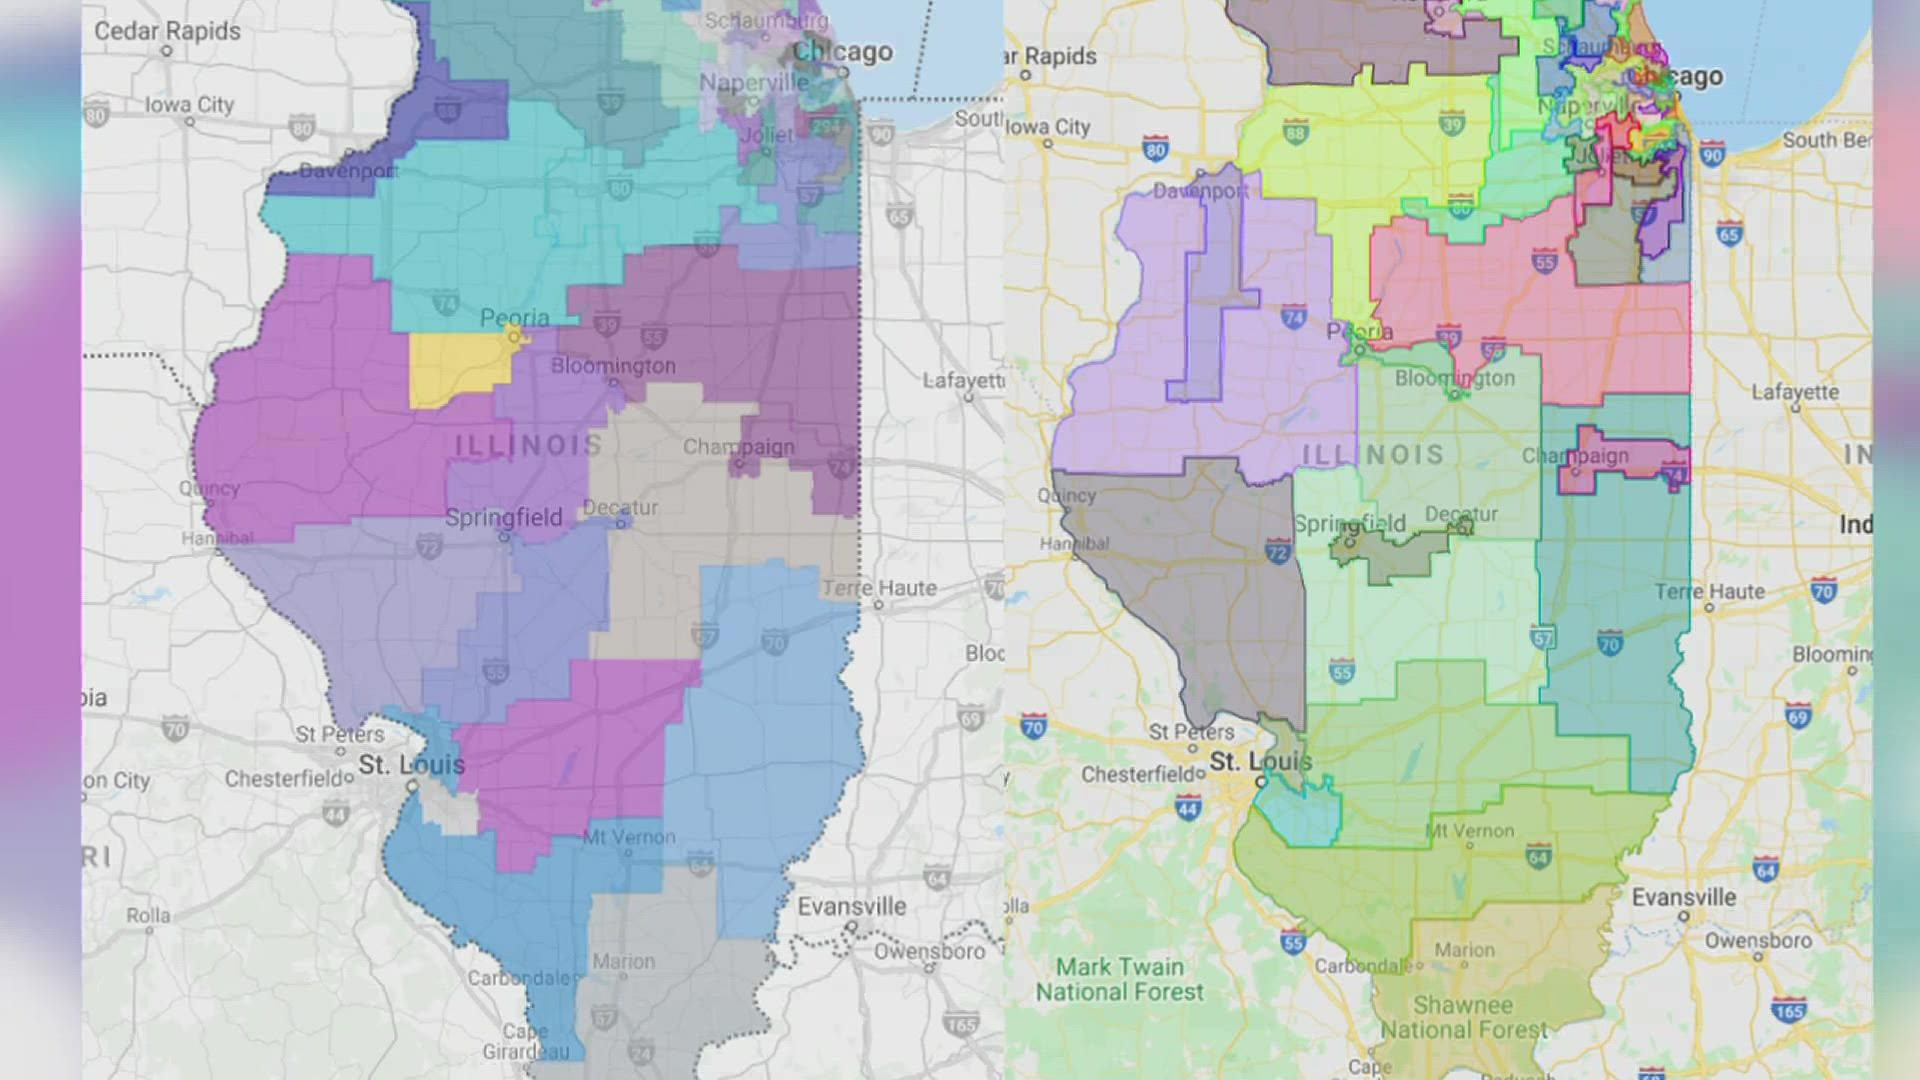 After Illinois redistricting, Republican Sen. Neil Anderson's house now falls a half-mile outside of the district he's represented since 2015.